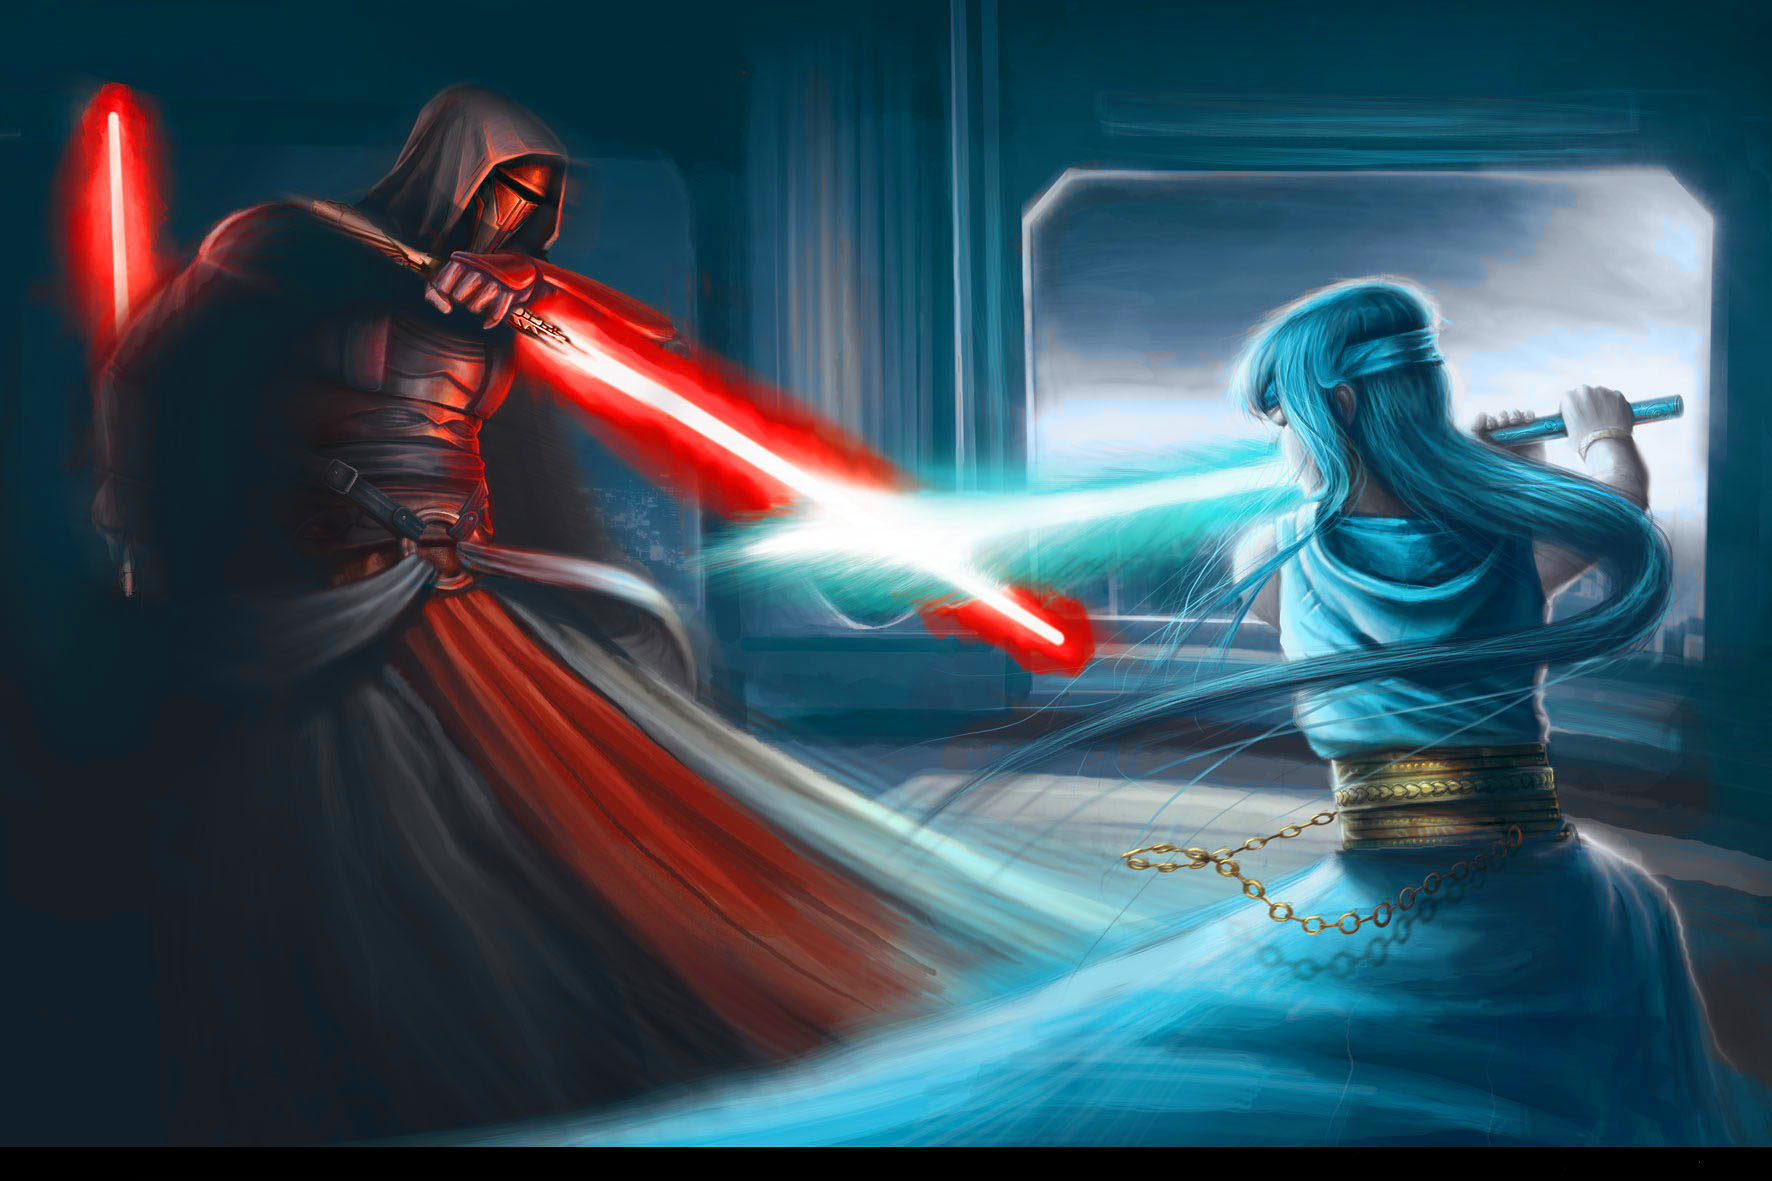 Image depicts Darth Revan, a hooded figure with a red lightsaber and blue lightsaber, embodying both Jedi and Sith aspects.